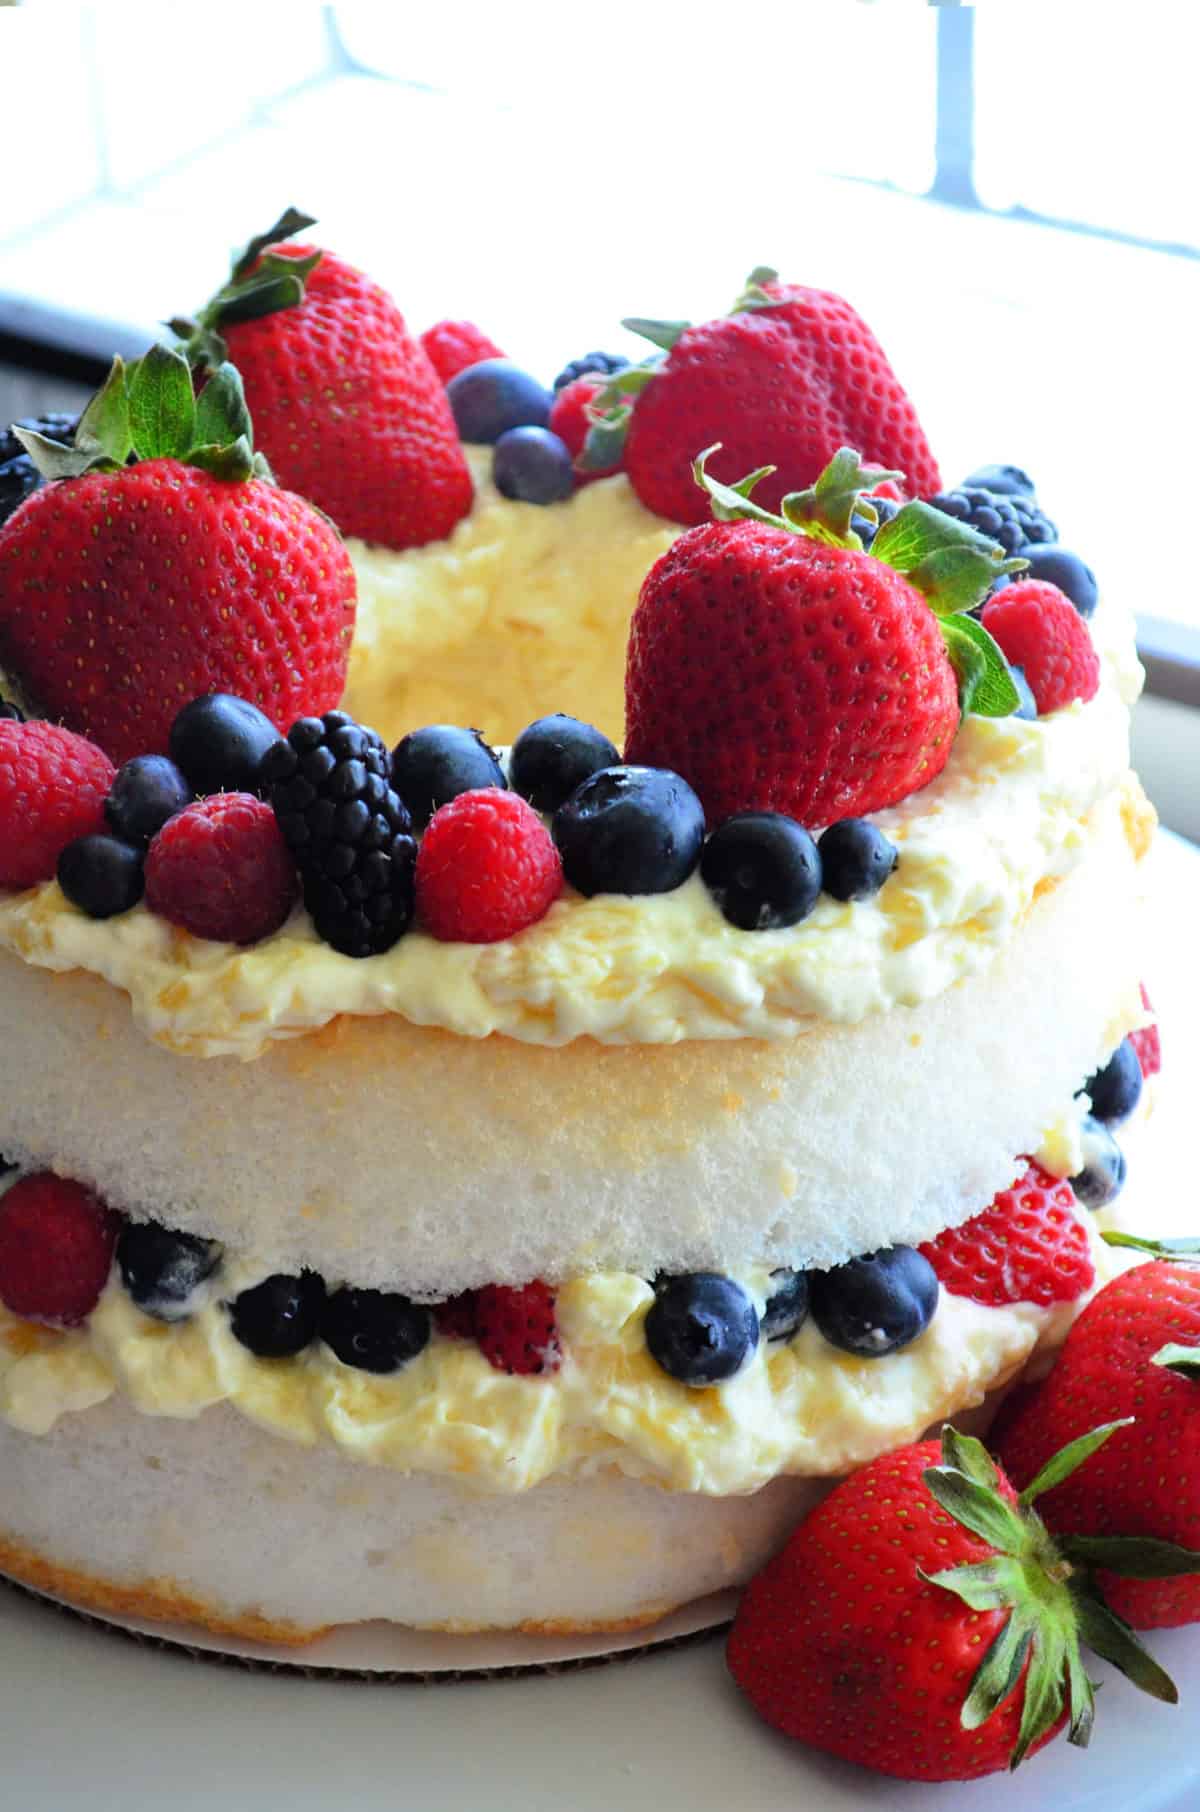 Side view of layered angel cake with mixed berries in middle layer and as topping.